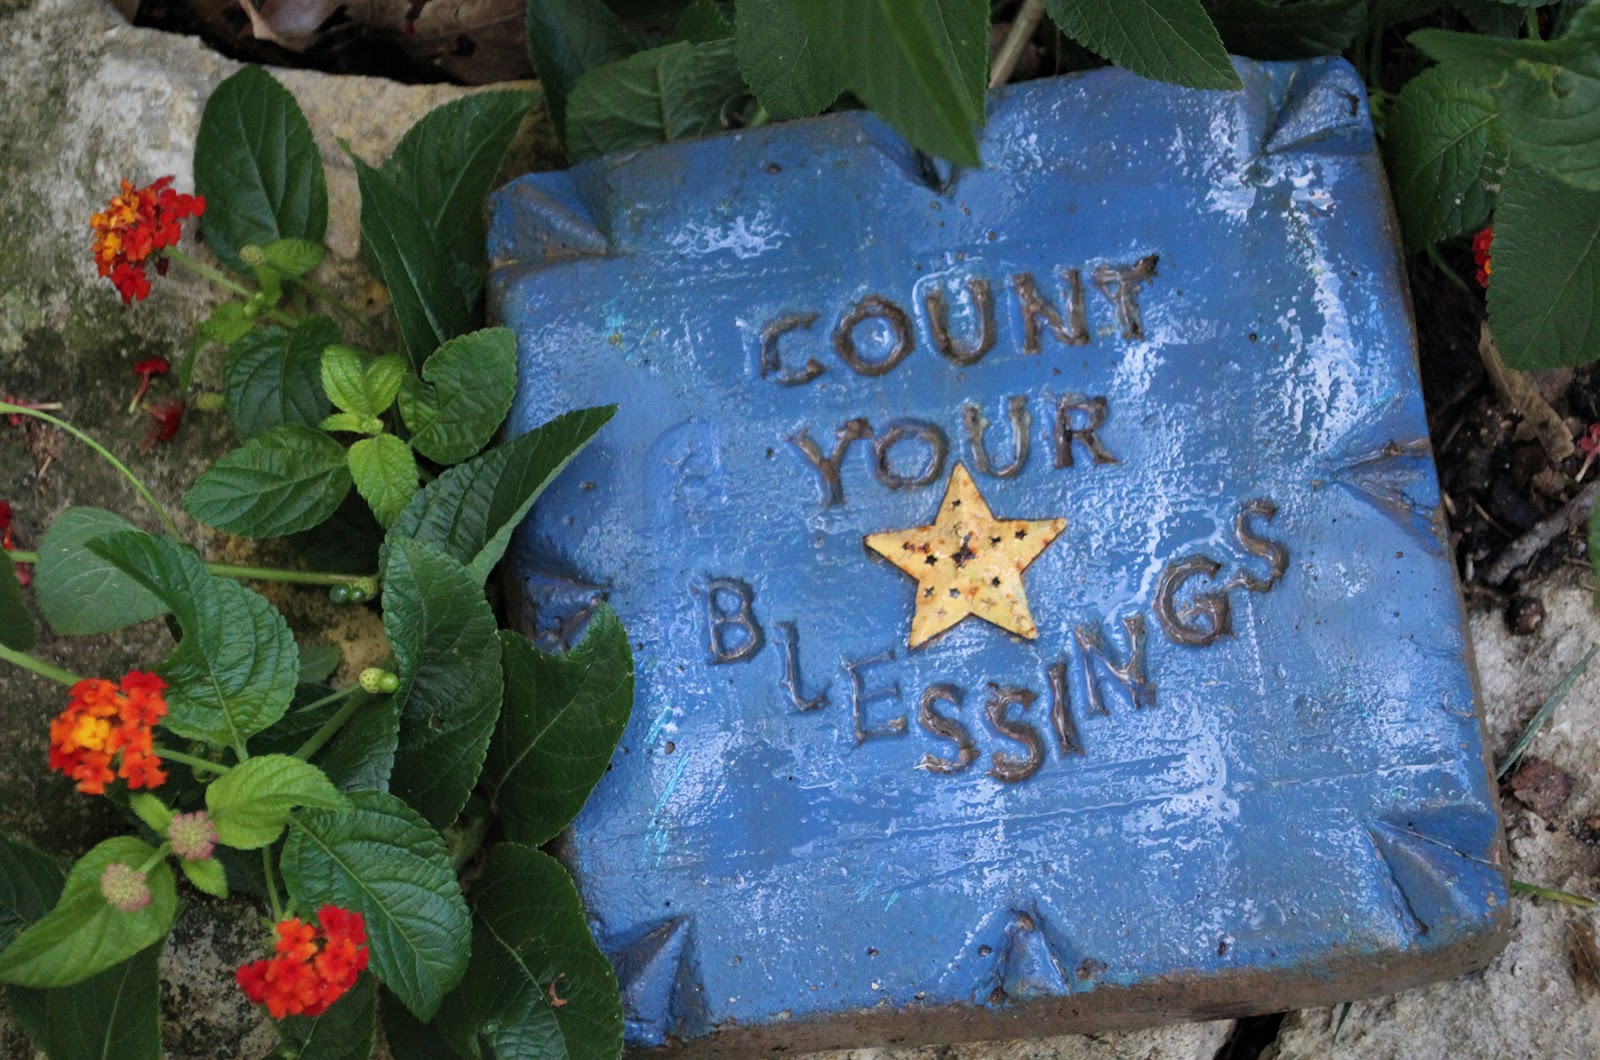 From the Summer's Garden: COUNTING YOUR BLESSINGS